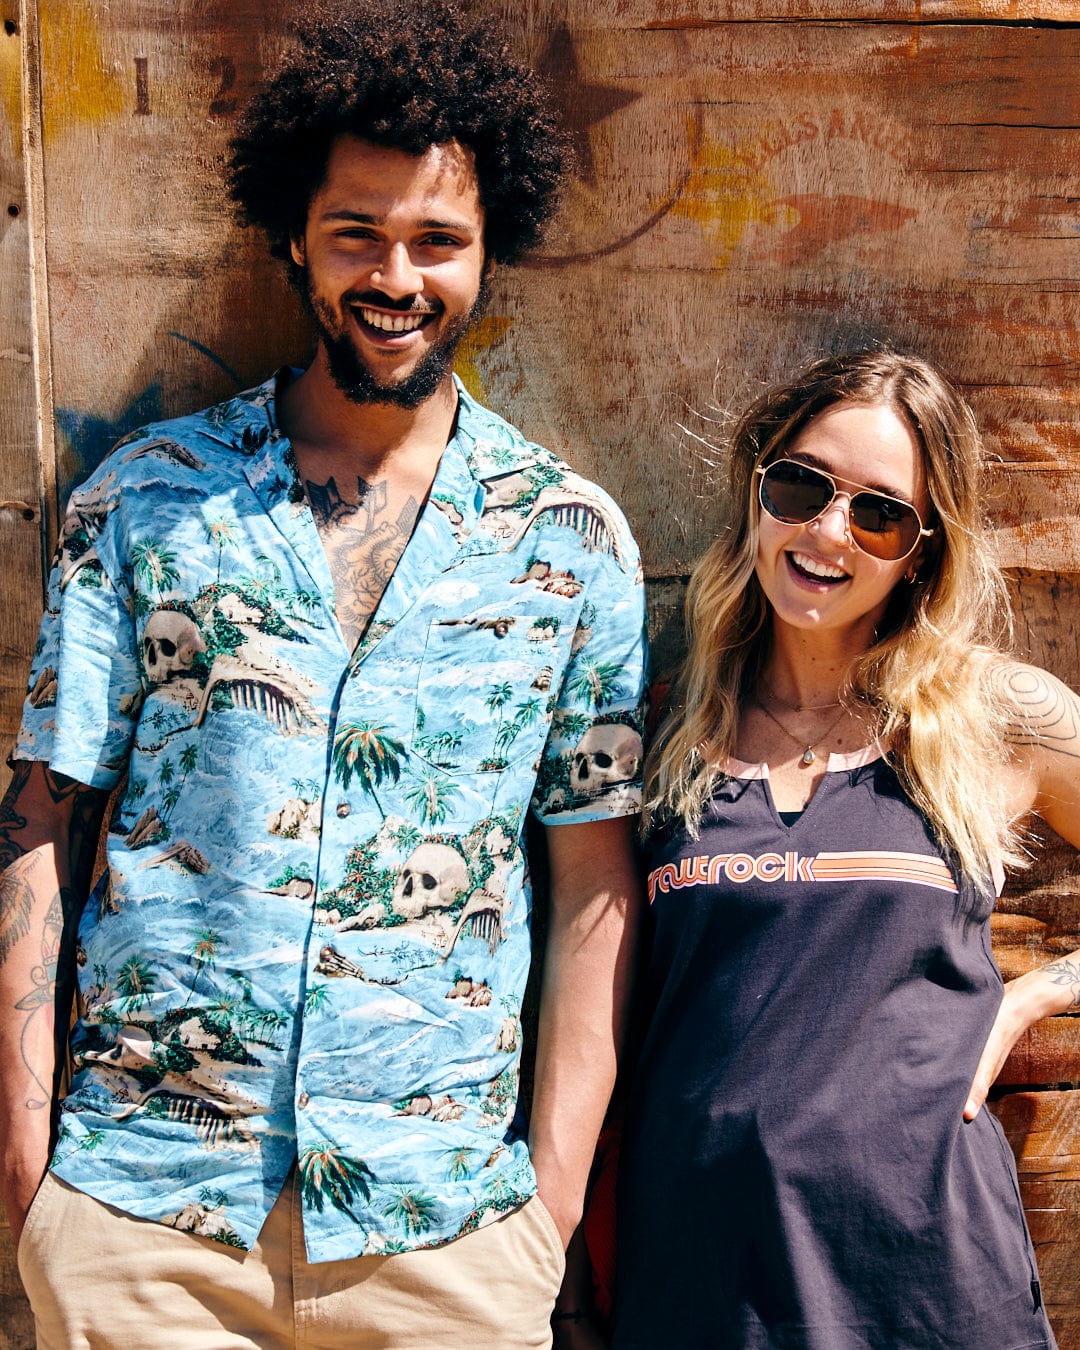 A man and a woman smiling in casual summer clothes, featuring Hawaiian Isle - Mens Short Sleeve Shirt in Blue by Saltrock, standing in front of a rustic wooden background.